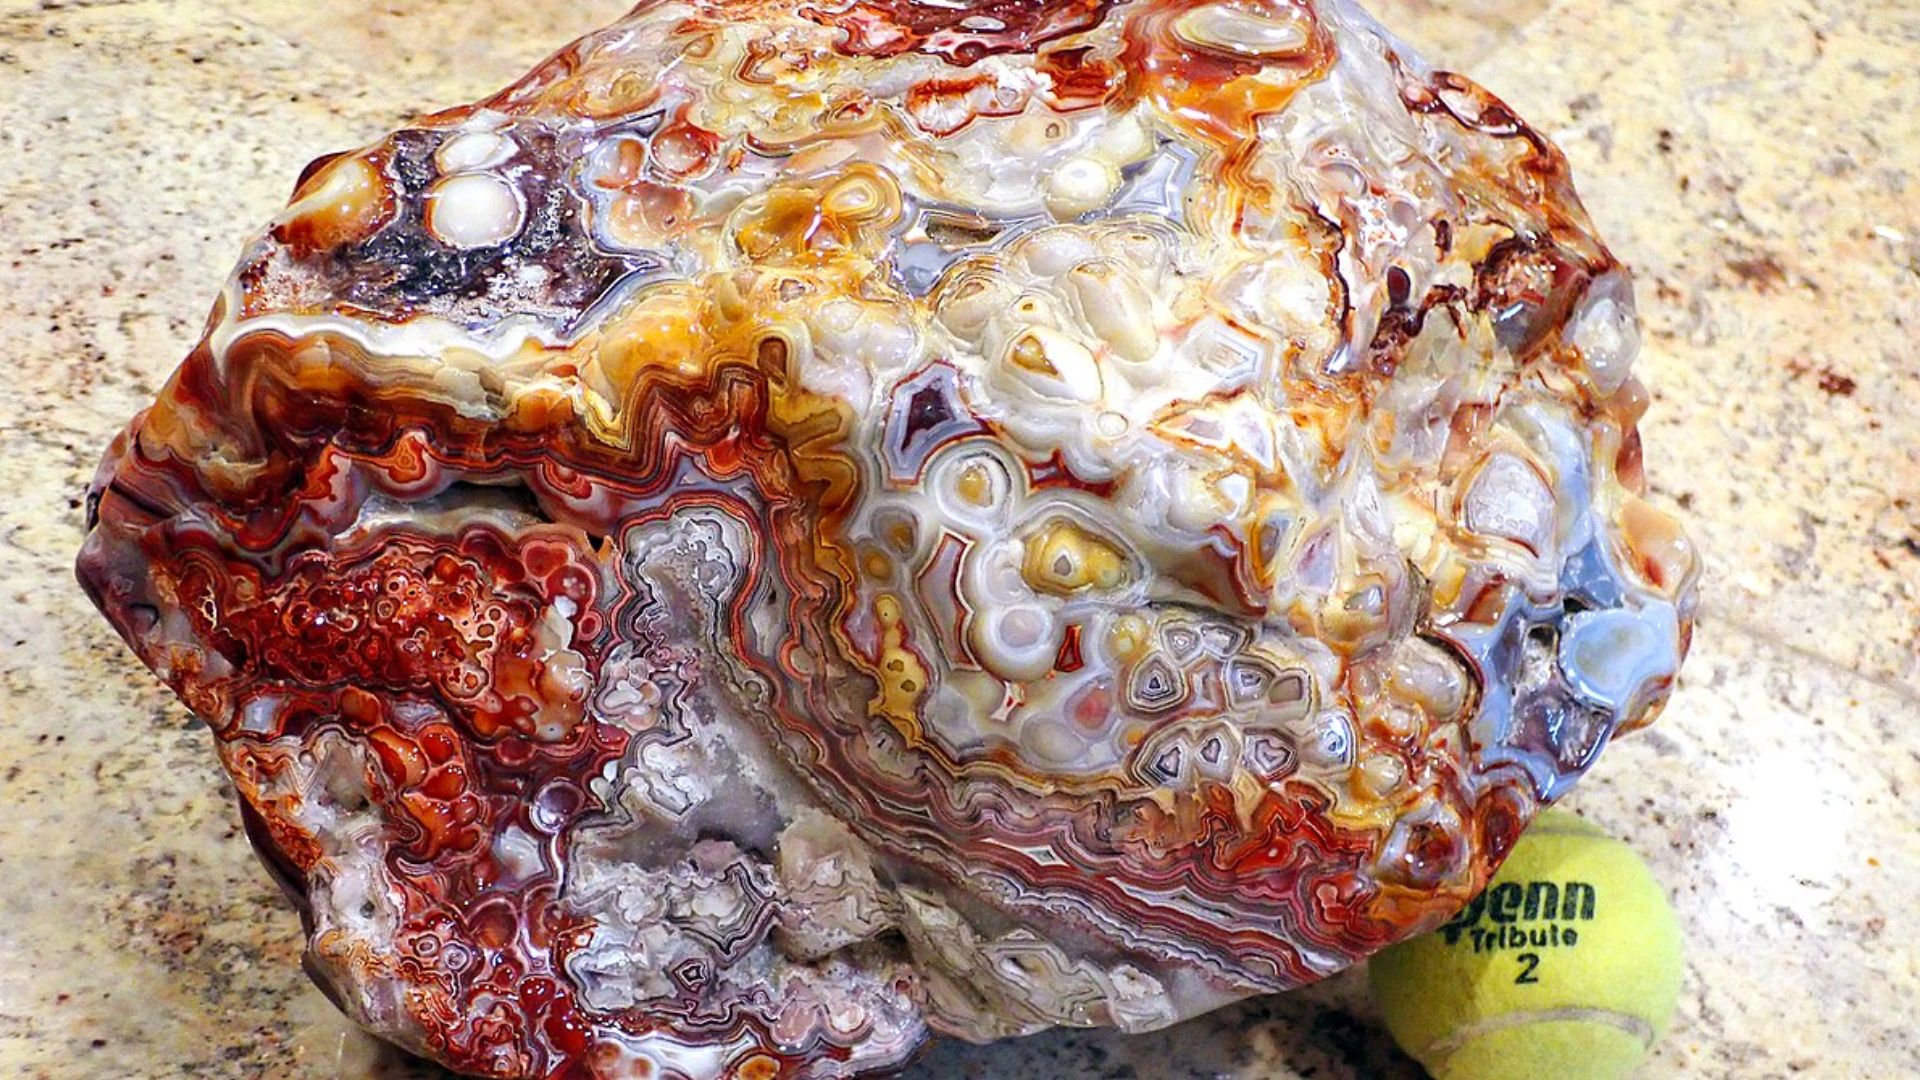 A Big Block of Agate Stone With A Ball Beneath